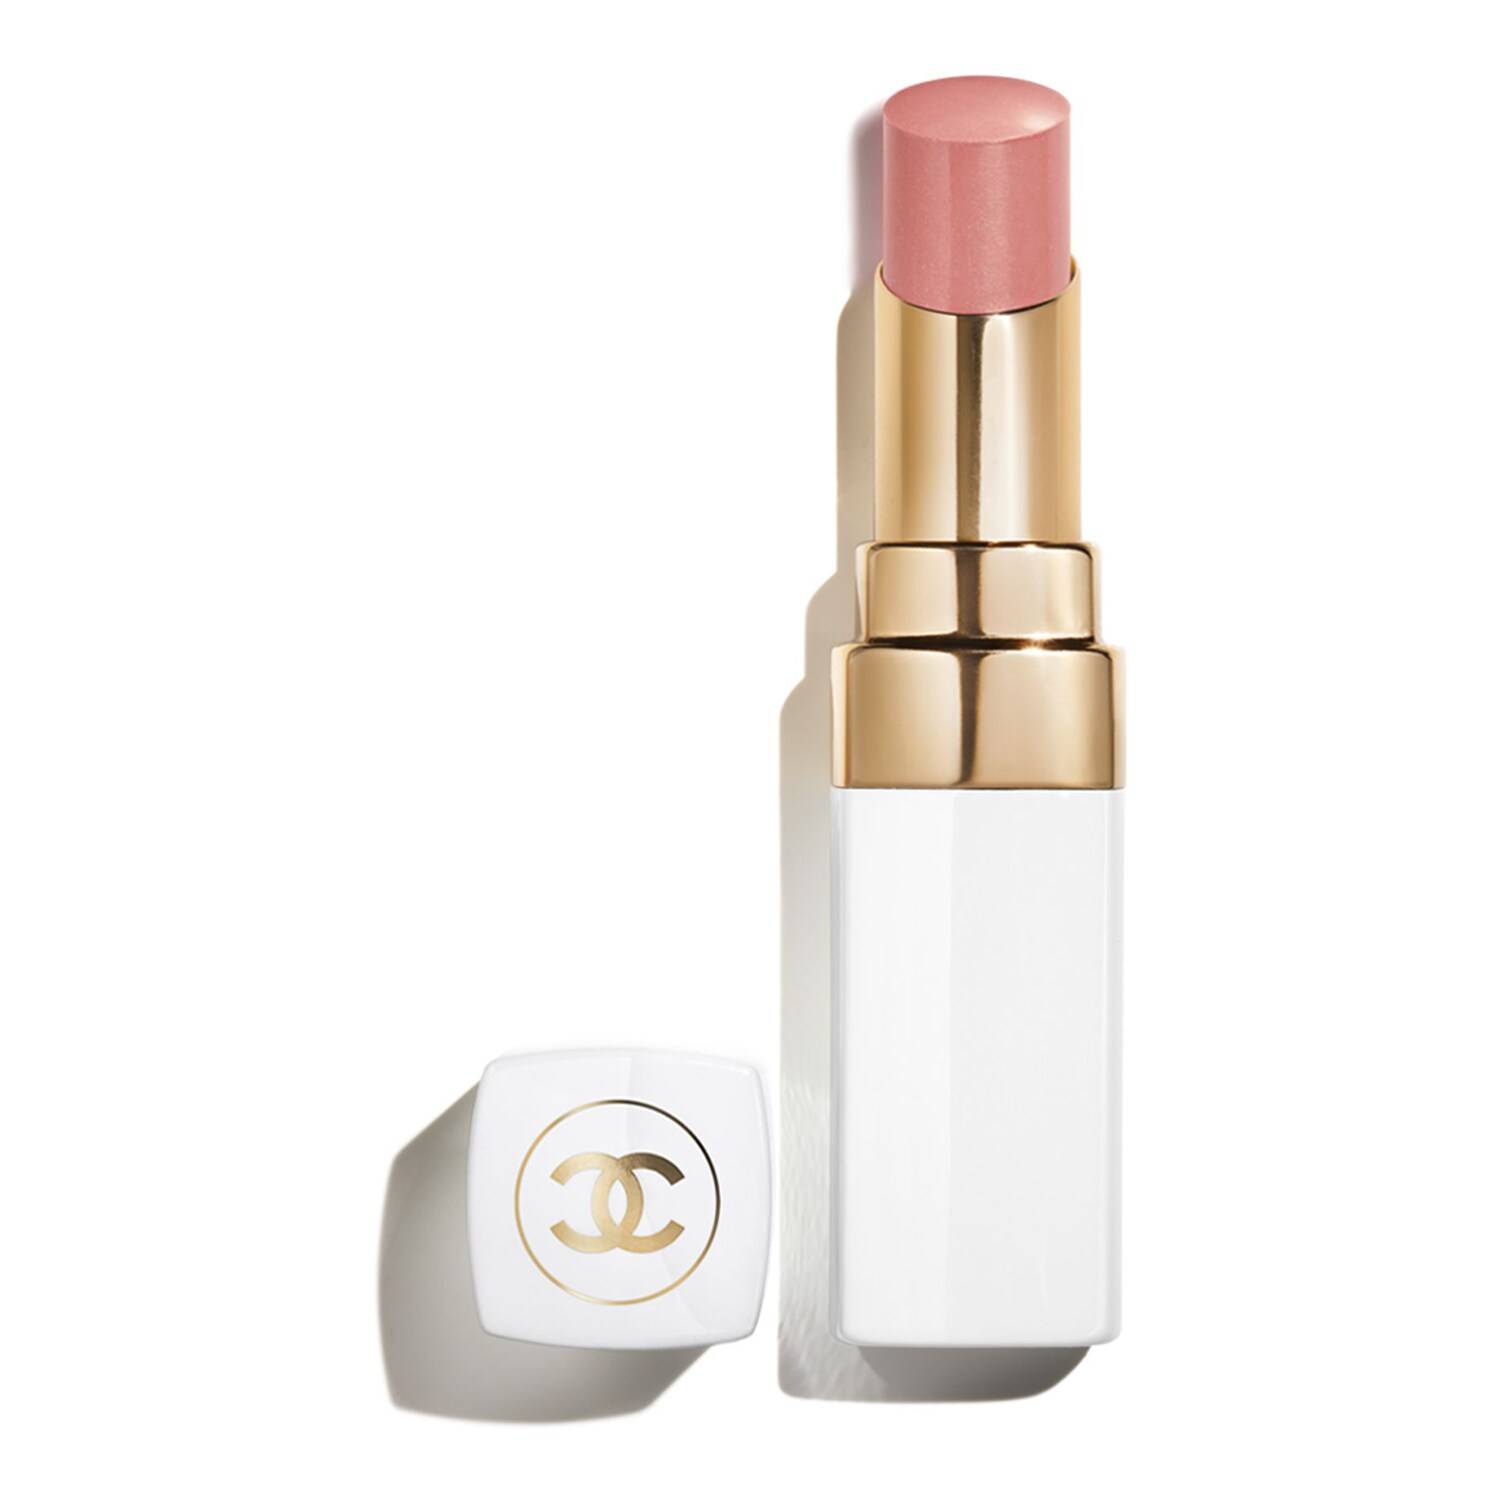 Chanel Rouge Coco Baume Lip Balm 3G 928 Pink Delight